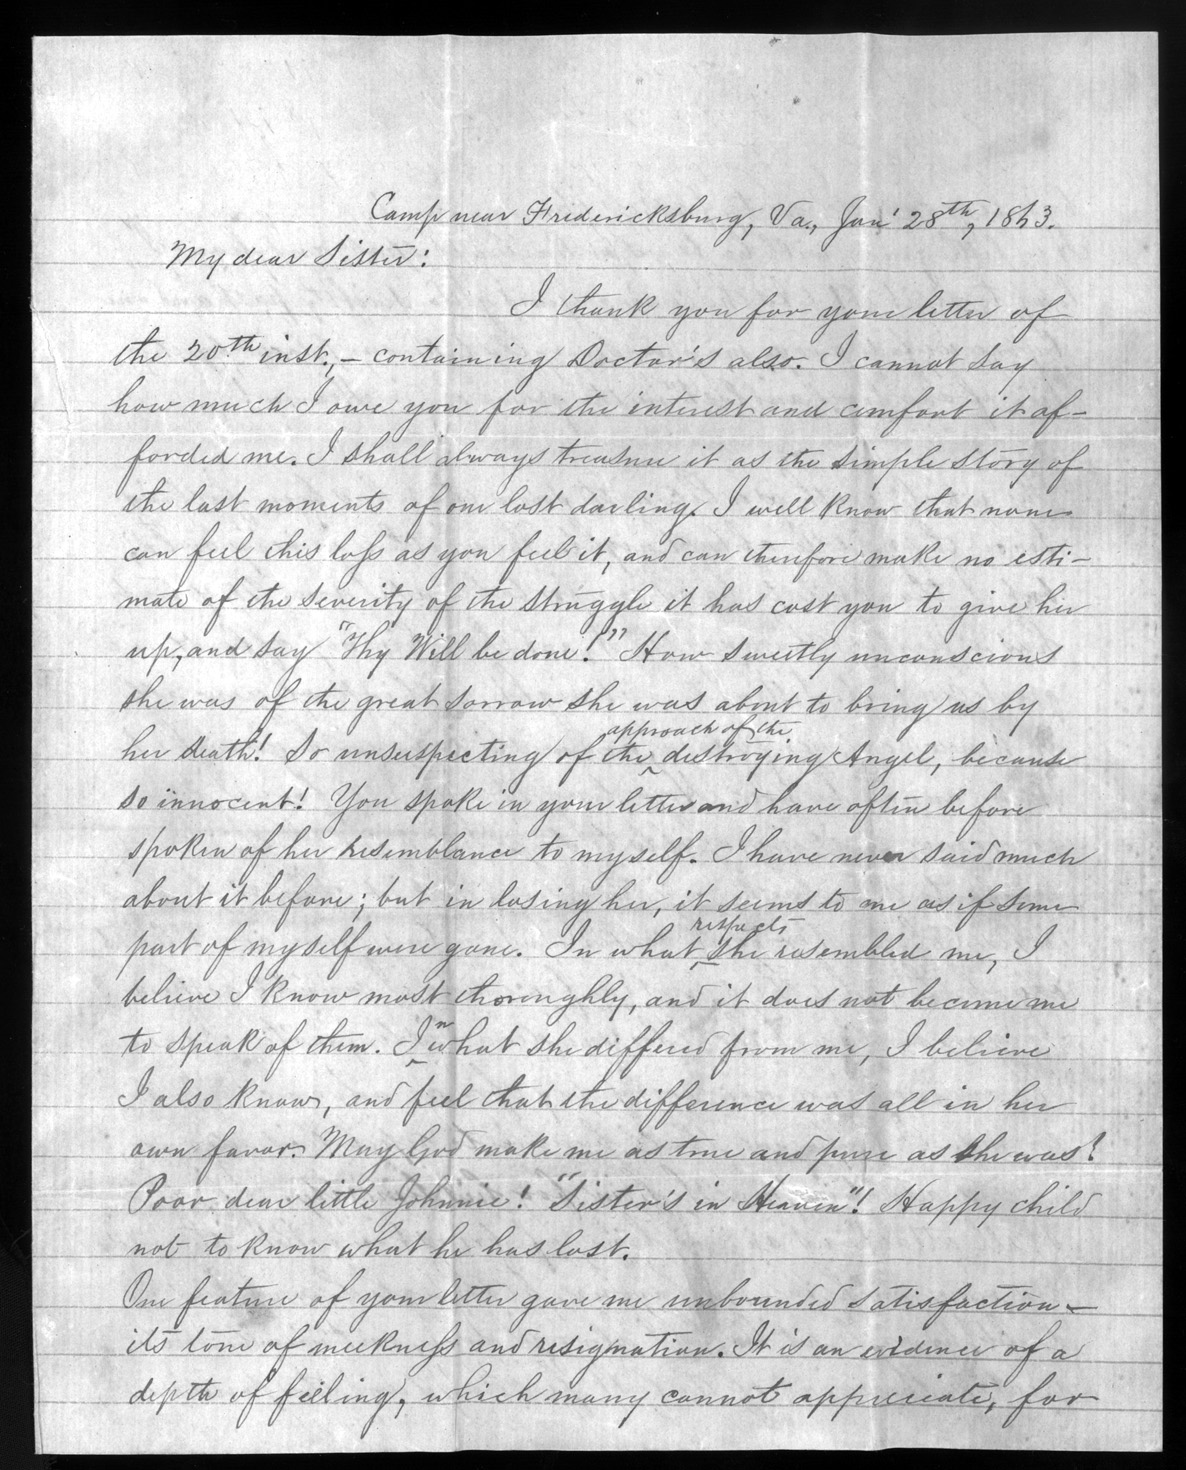 Letter, William W. Sillers, Camp near Fredericksburg, Virginia, to Frances Sillers Holmes